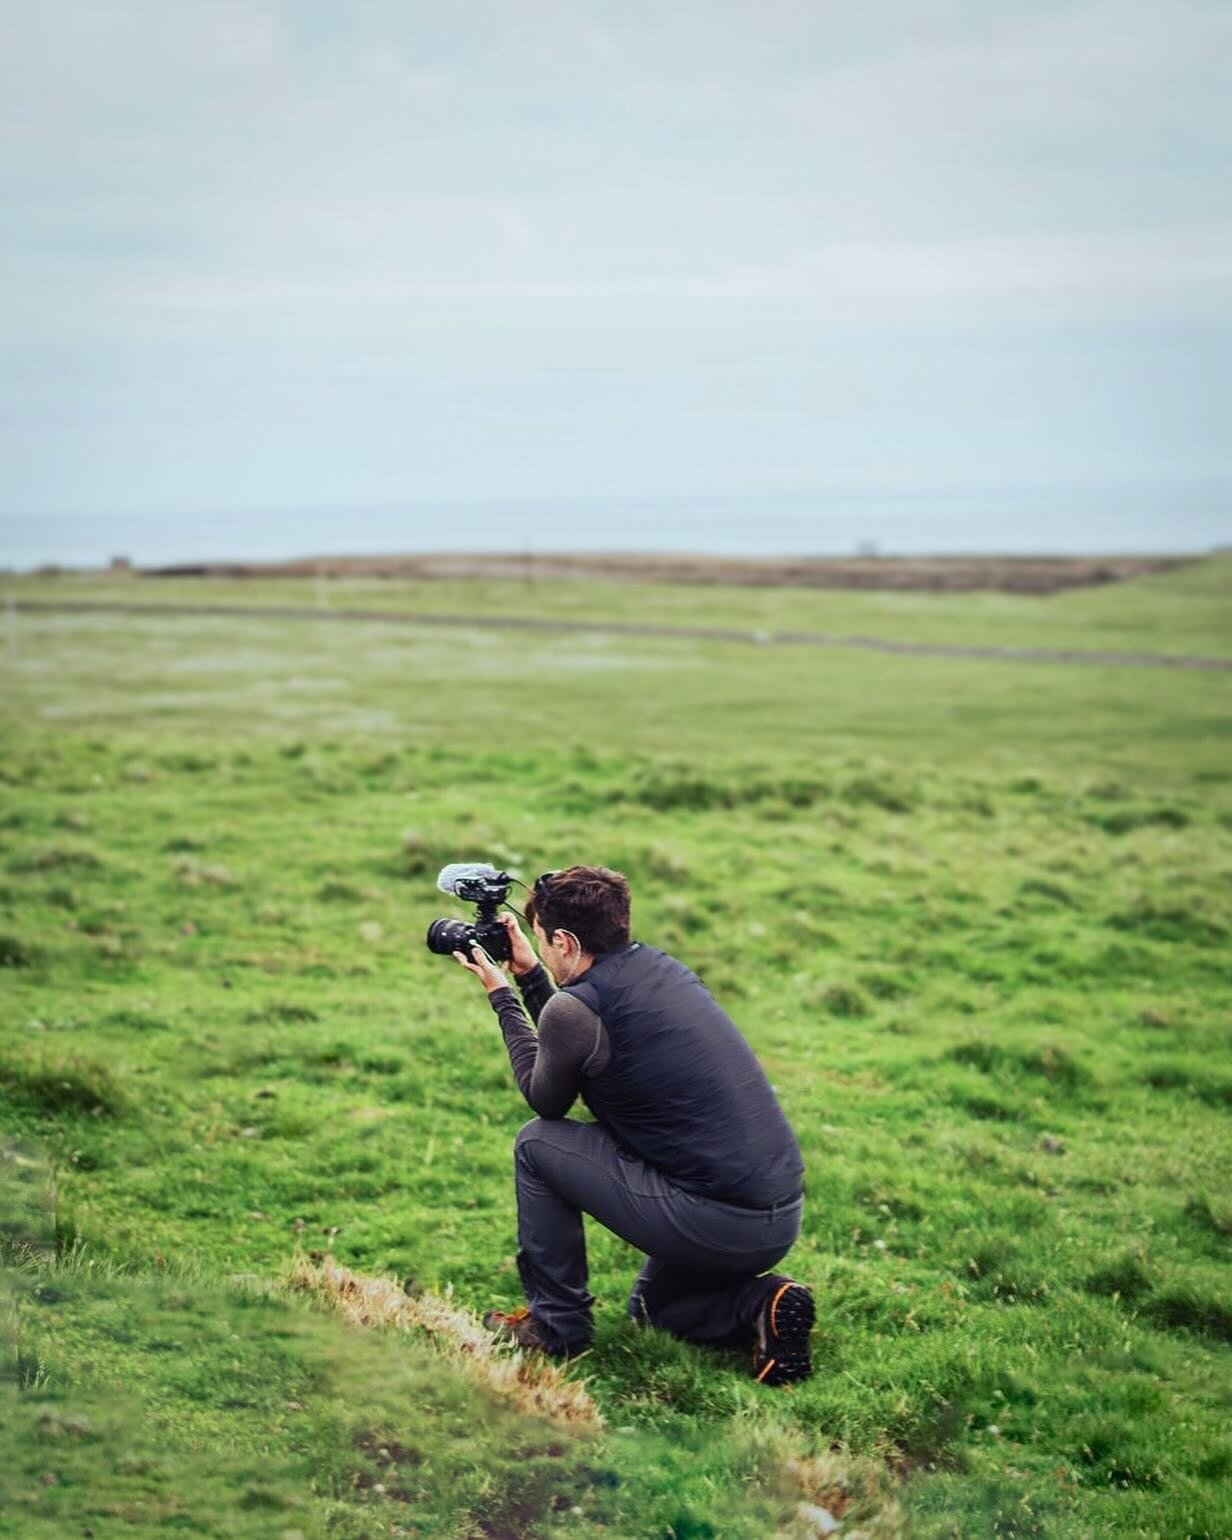 Filming on location in Shetland earlier this year. 

Could have got a great pun out of this photo @owensinclair__ took were I not kneeling.